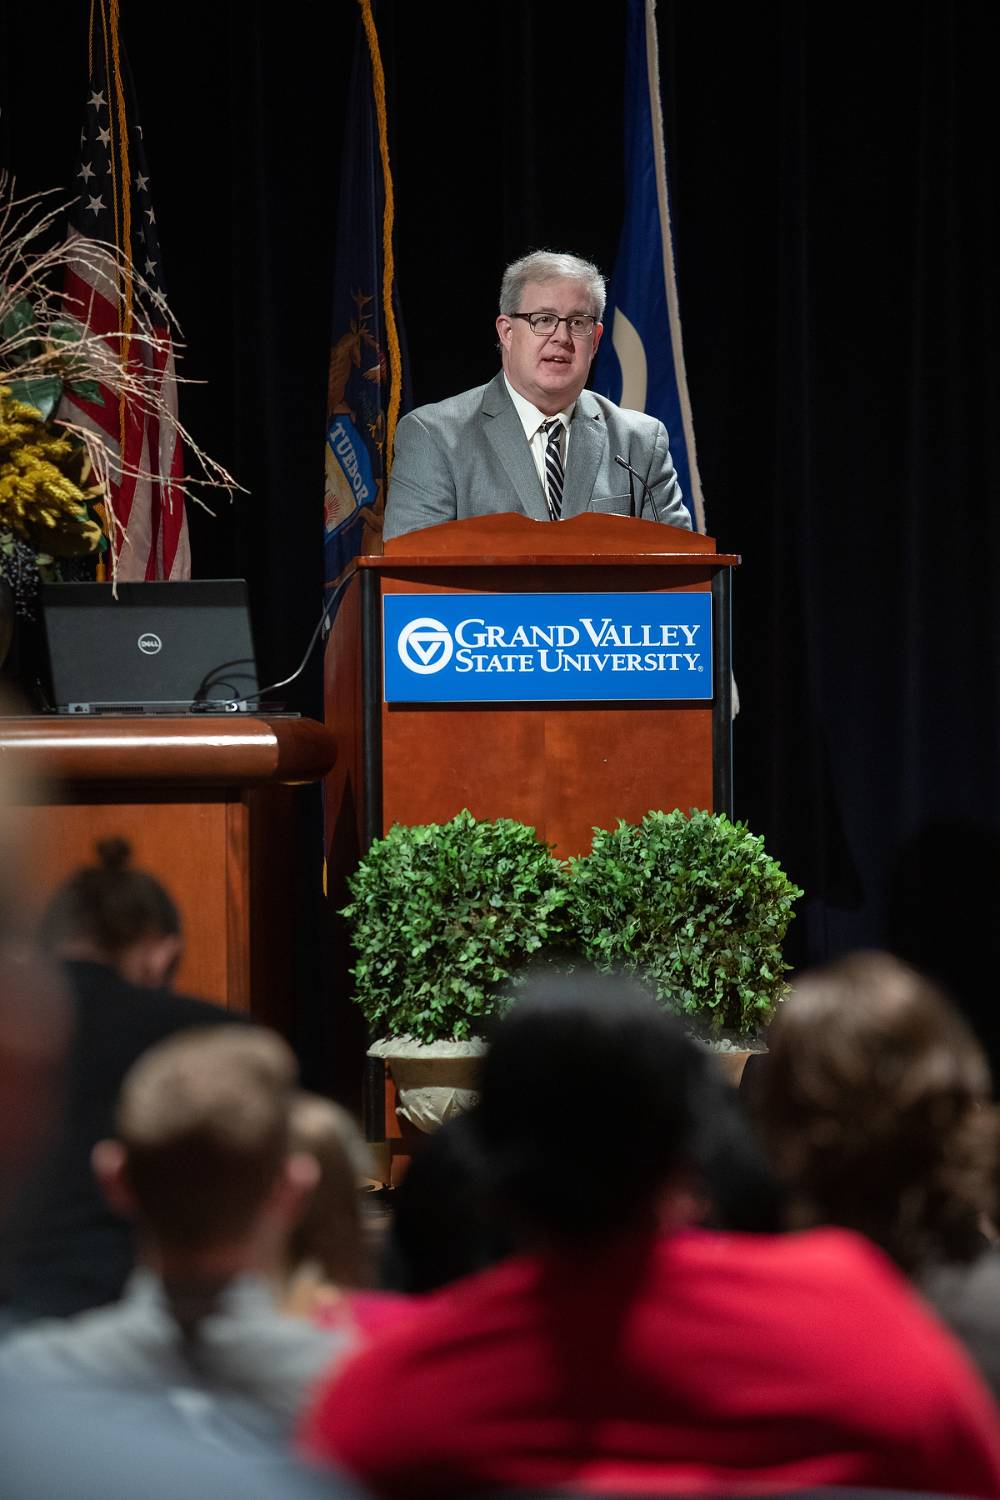 Man stands talking at a GVSU podium, with people sitting out of focus in the foreground